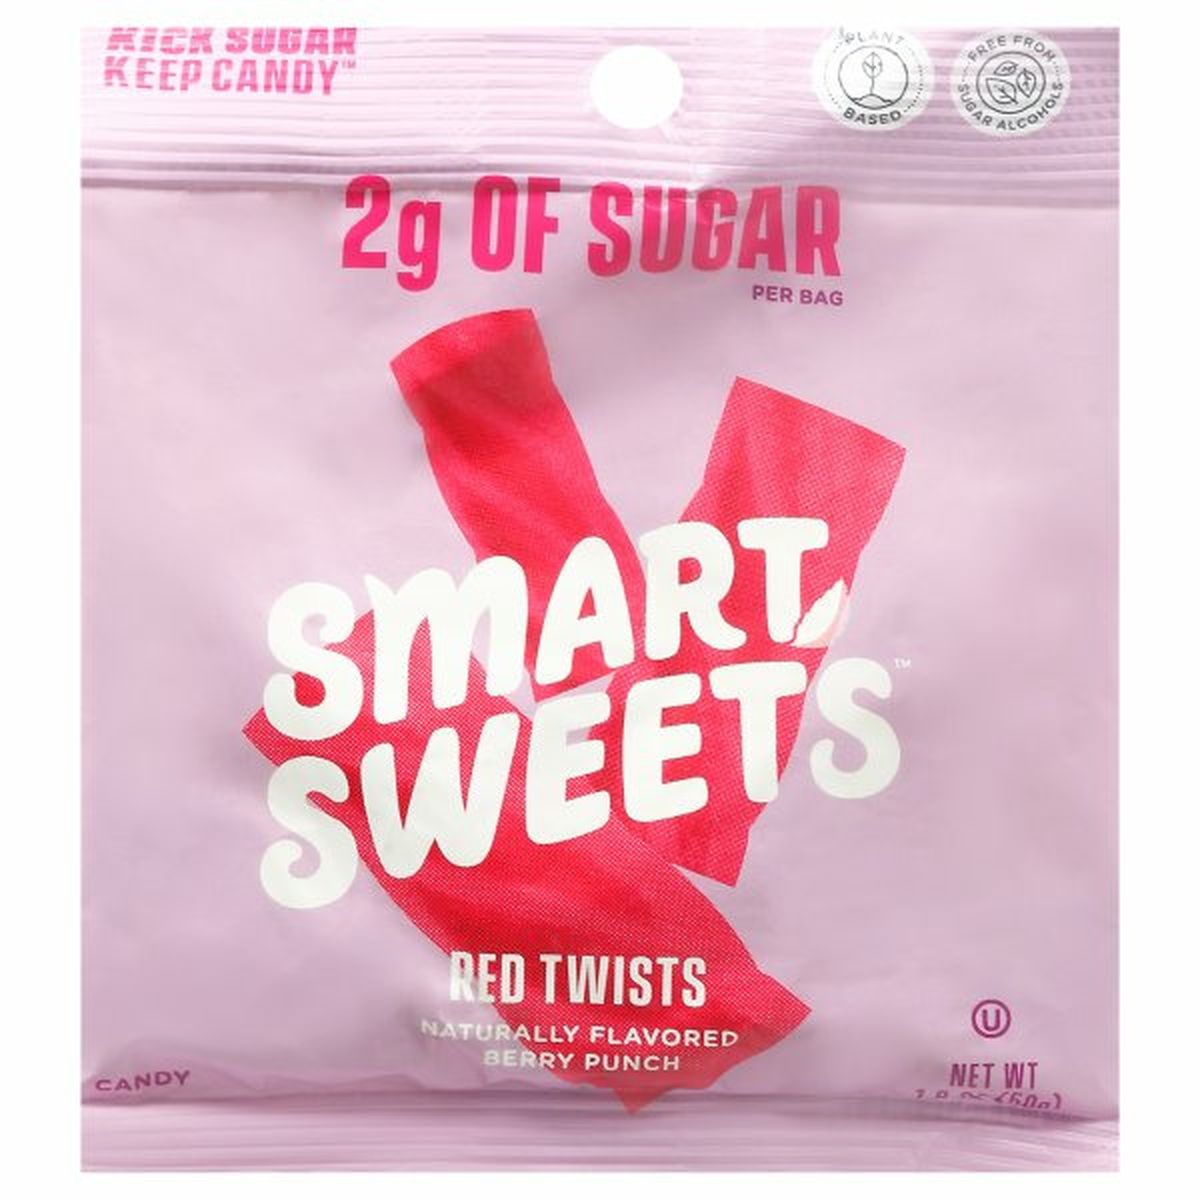 Calories in SmartSweets Candy, Berry Punch, Red Twists